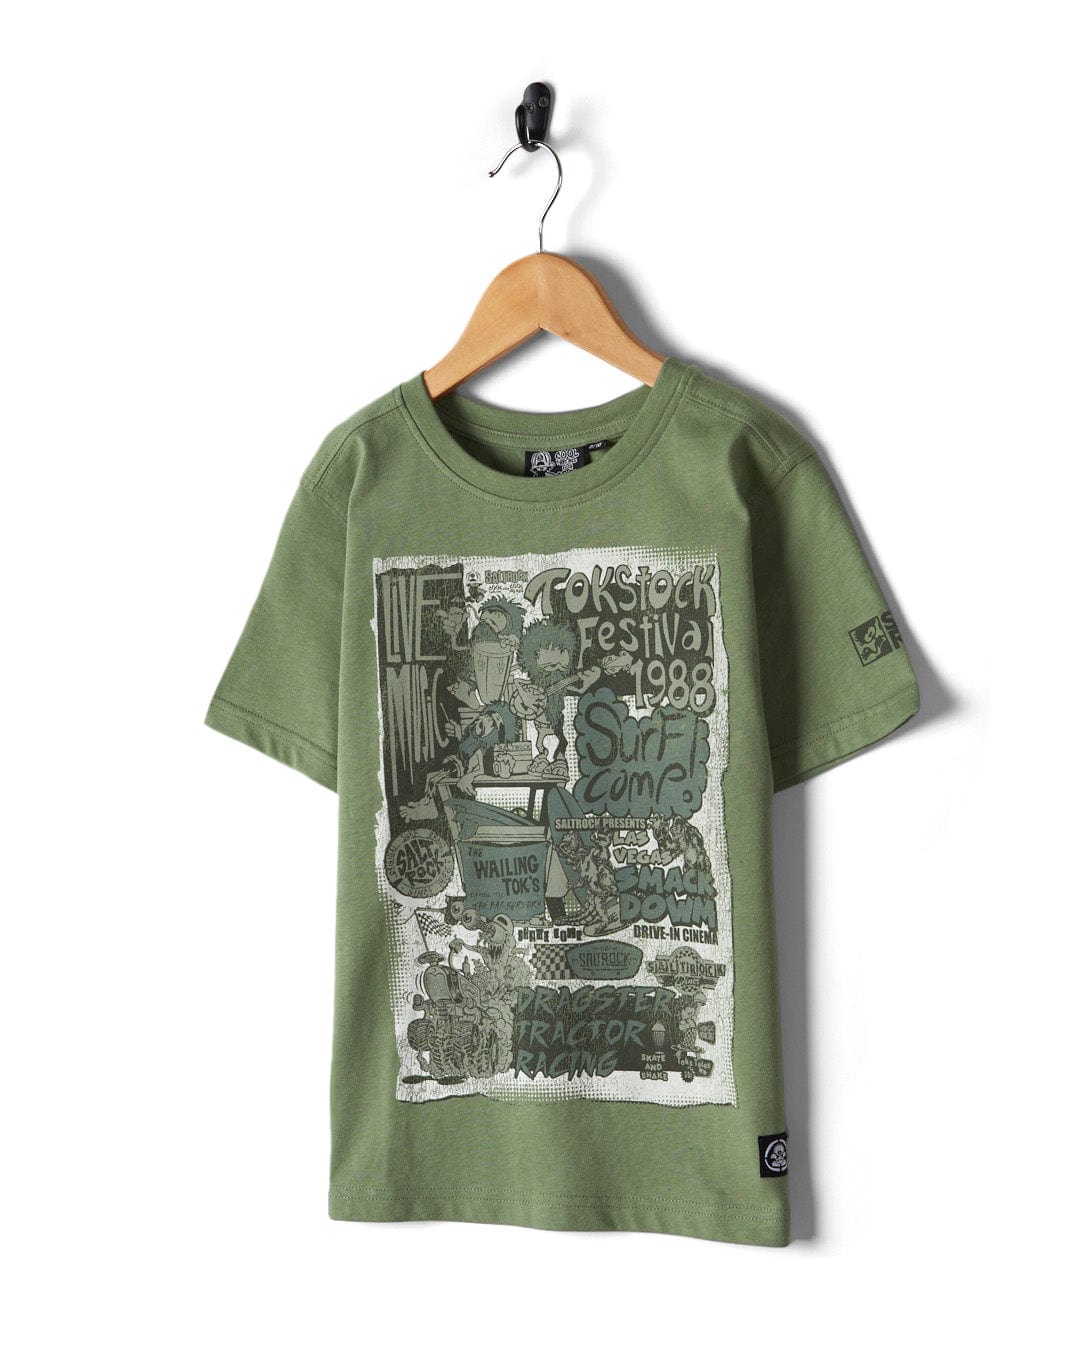 A green Festival Merch - Kids Short Sleeve T-Shirt with an image of a man and a woman by Saltrock.